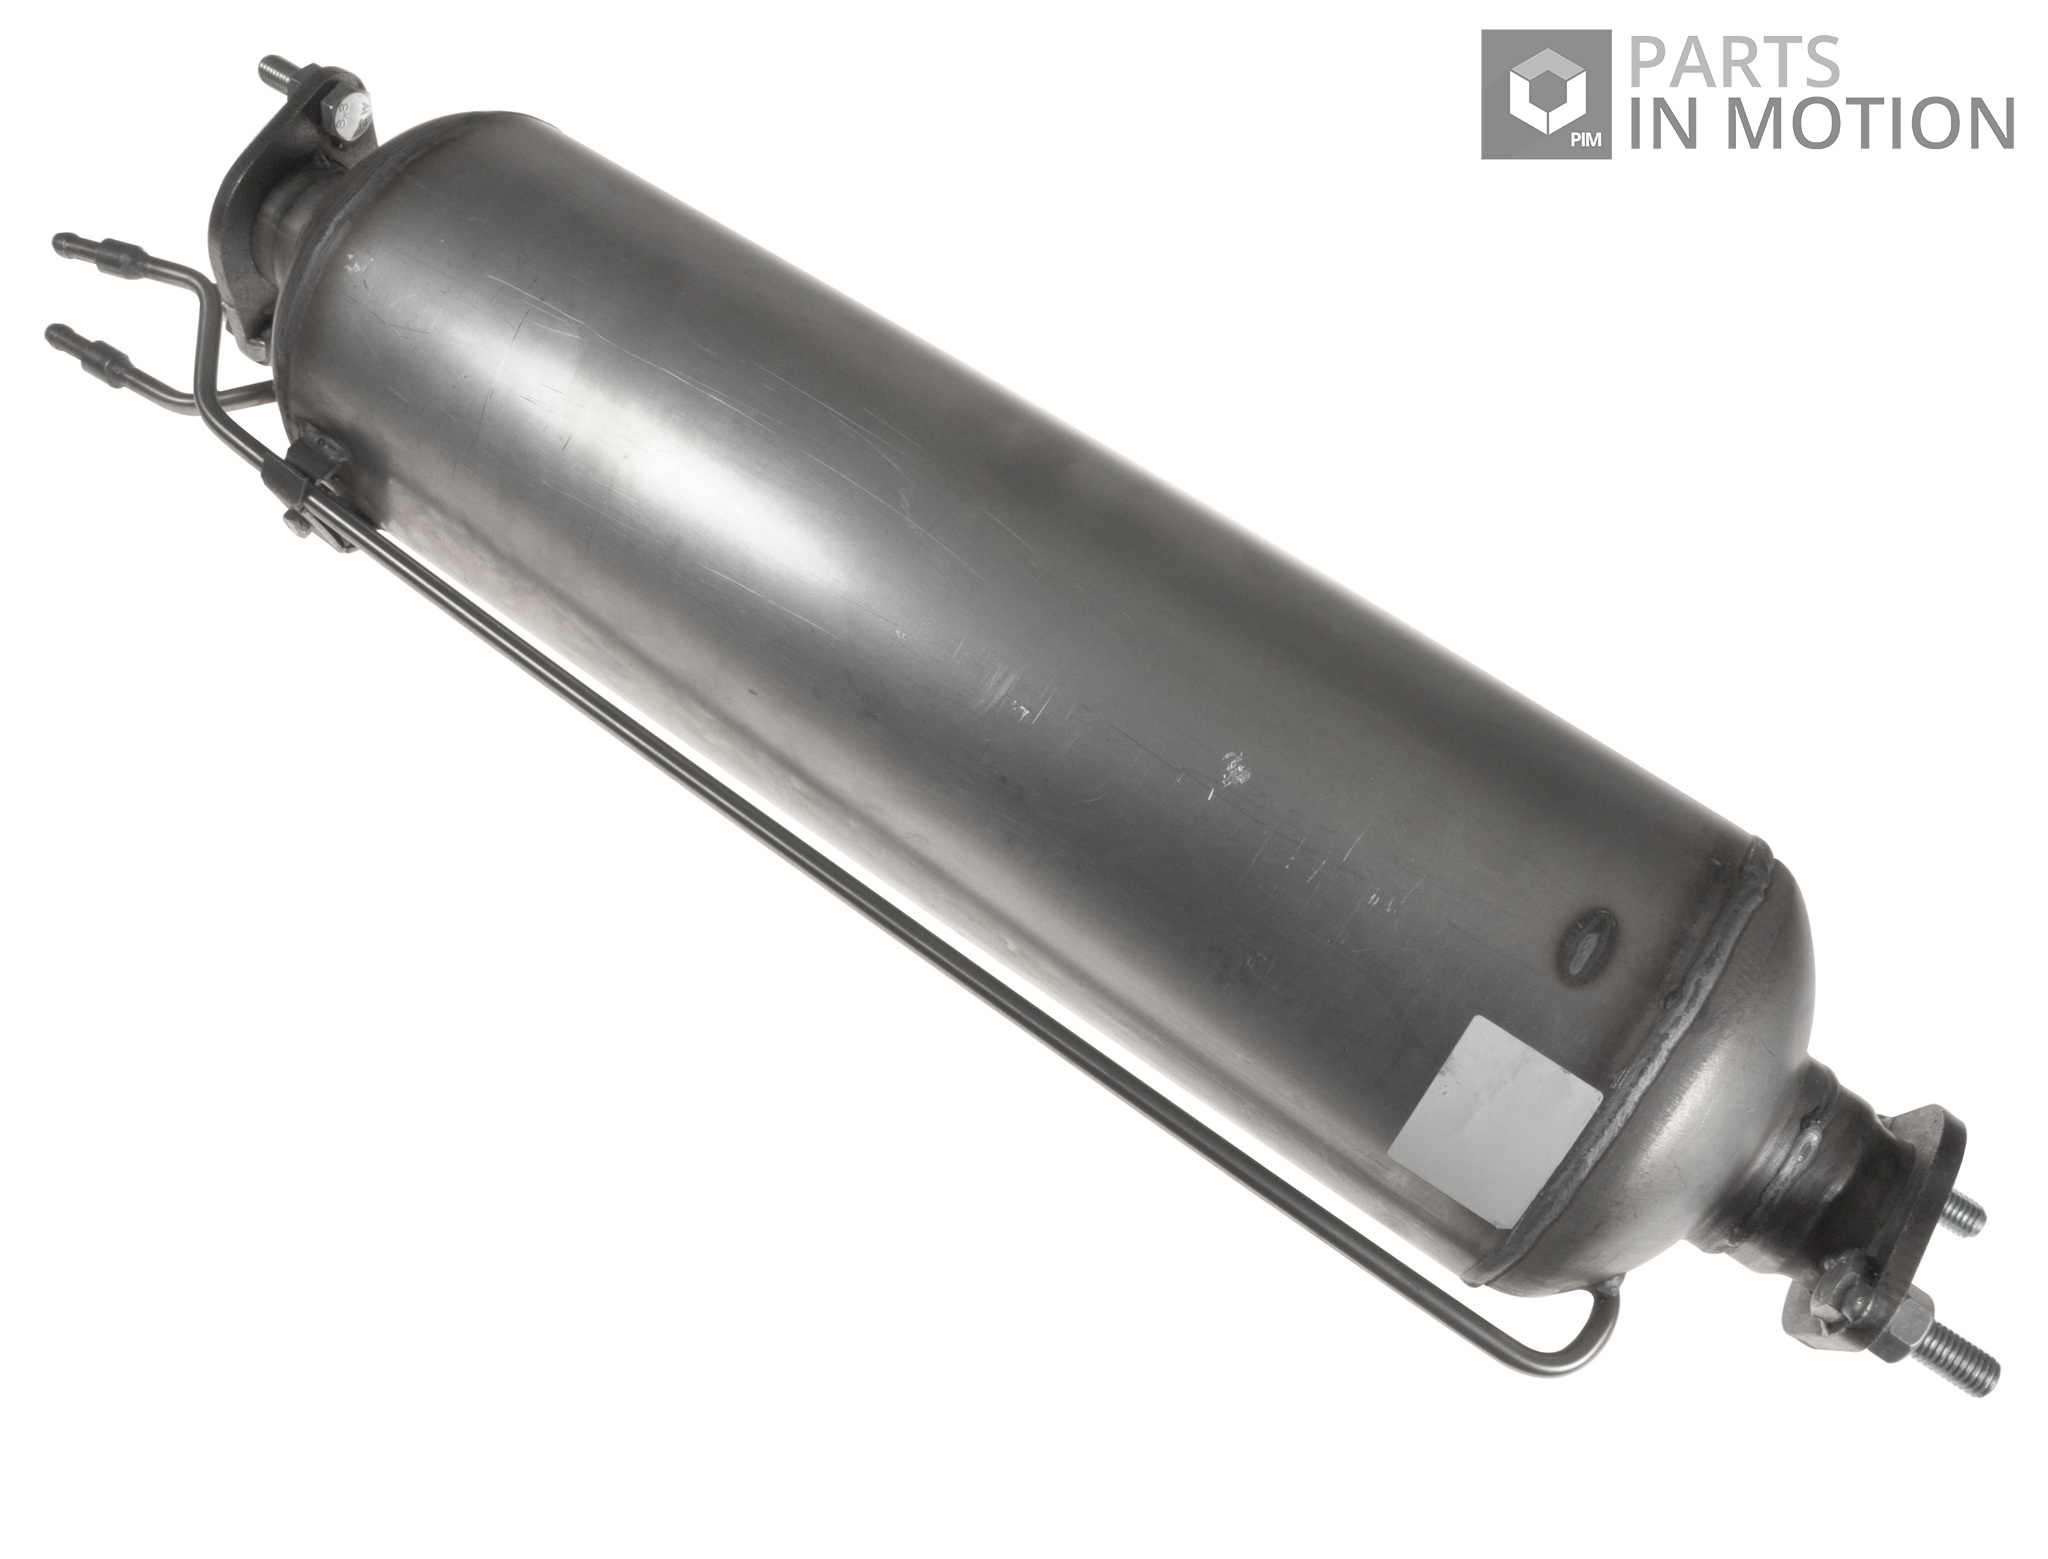 DPF Diesel Particulate Filter fits KIA SPORTAGE 2.0D 06 to